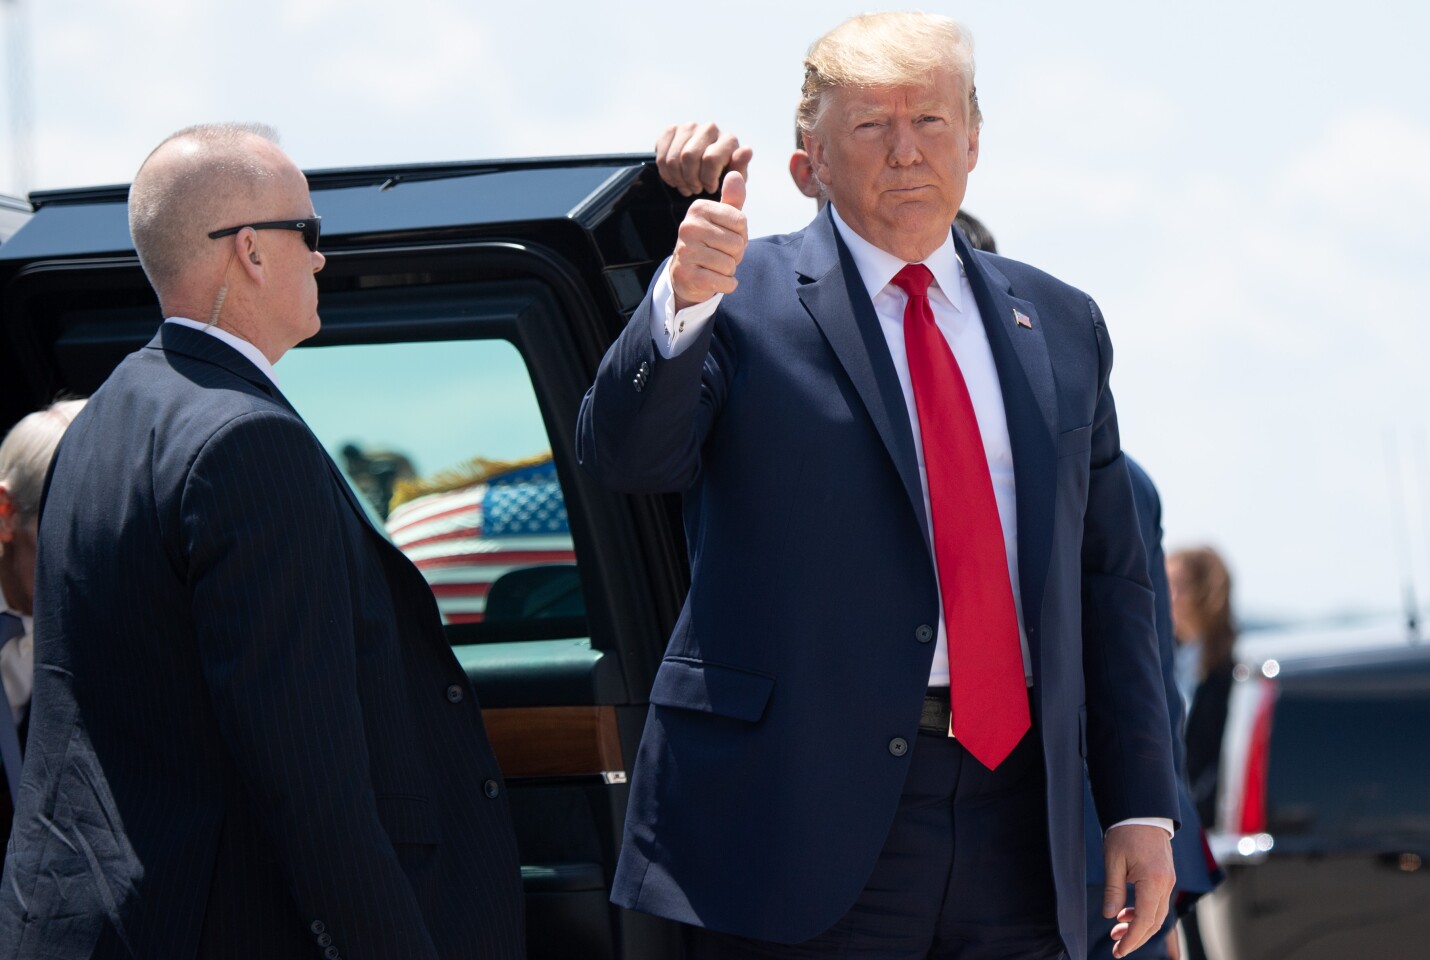 US President Donald Trump arrives to board Air Force One at Wright-Patterson Air Force Base in Ohio on August 7, 2019. - Trump and First Lady Melania Trump met with first responders, hospital staff, victims and their families, following the August 4 mass shootings in Dayton's popular Oregon District, which left nine people dead. (Photo by SAUL LOEB / AFP)SAUL LOEB/AFP/Getty Images ** OUTS - ELSENT, FPG, CM - OUTS * NM, PH, VA if sourced by CT, LA or MoD **